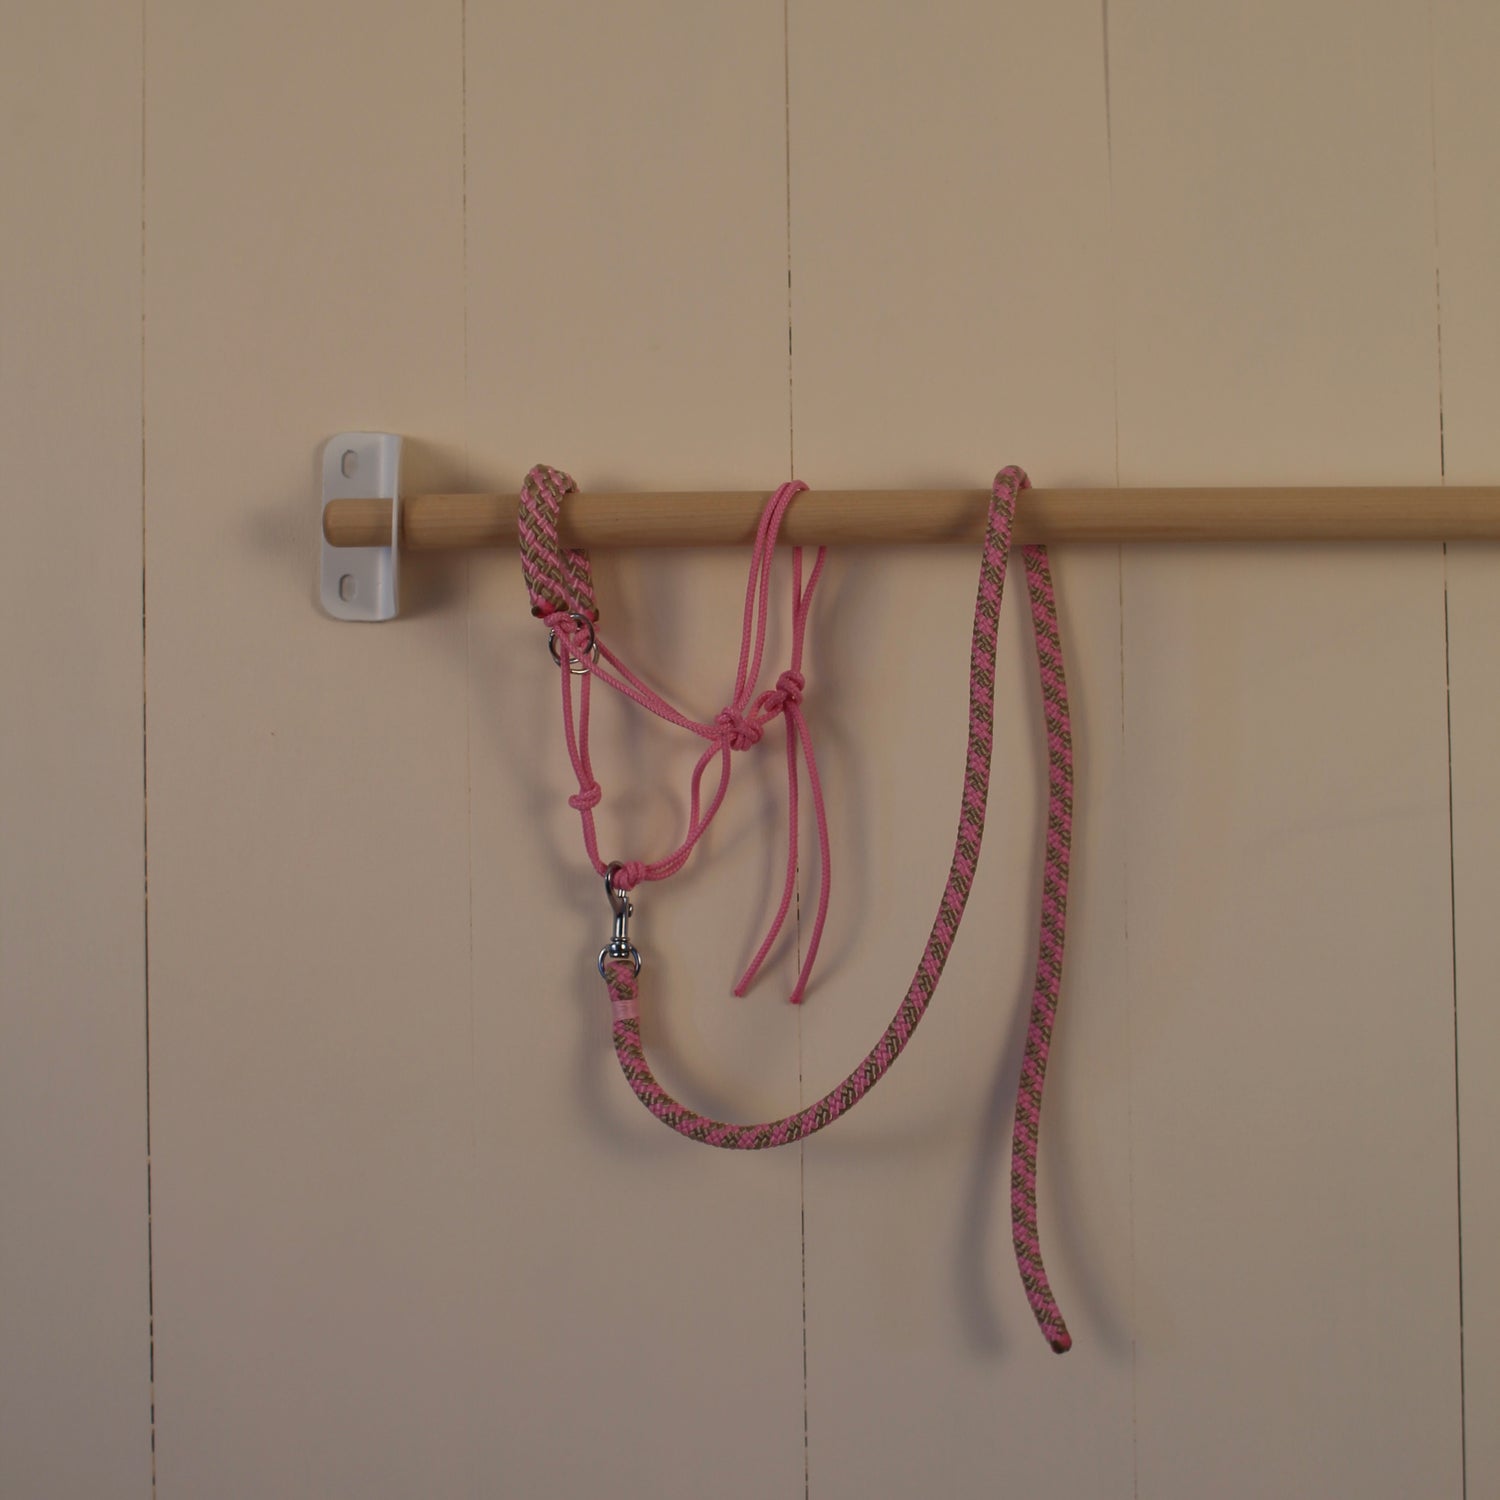 Halter with rope lilac / pink / white